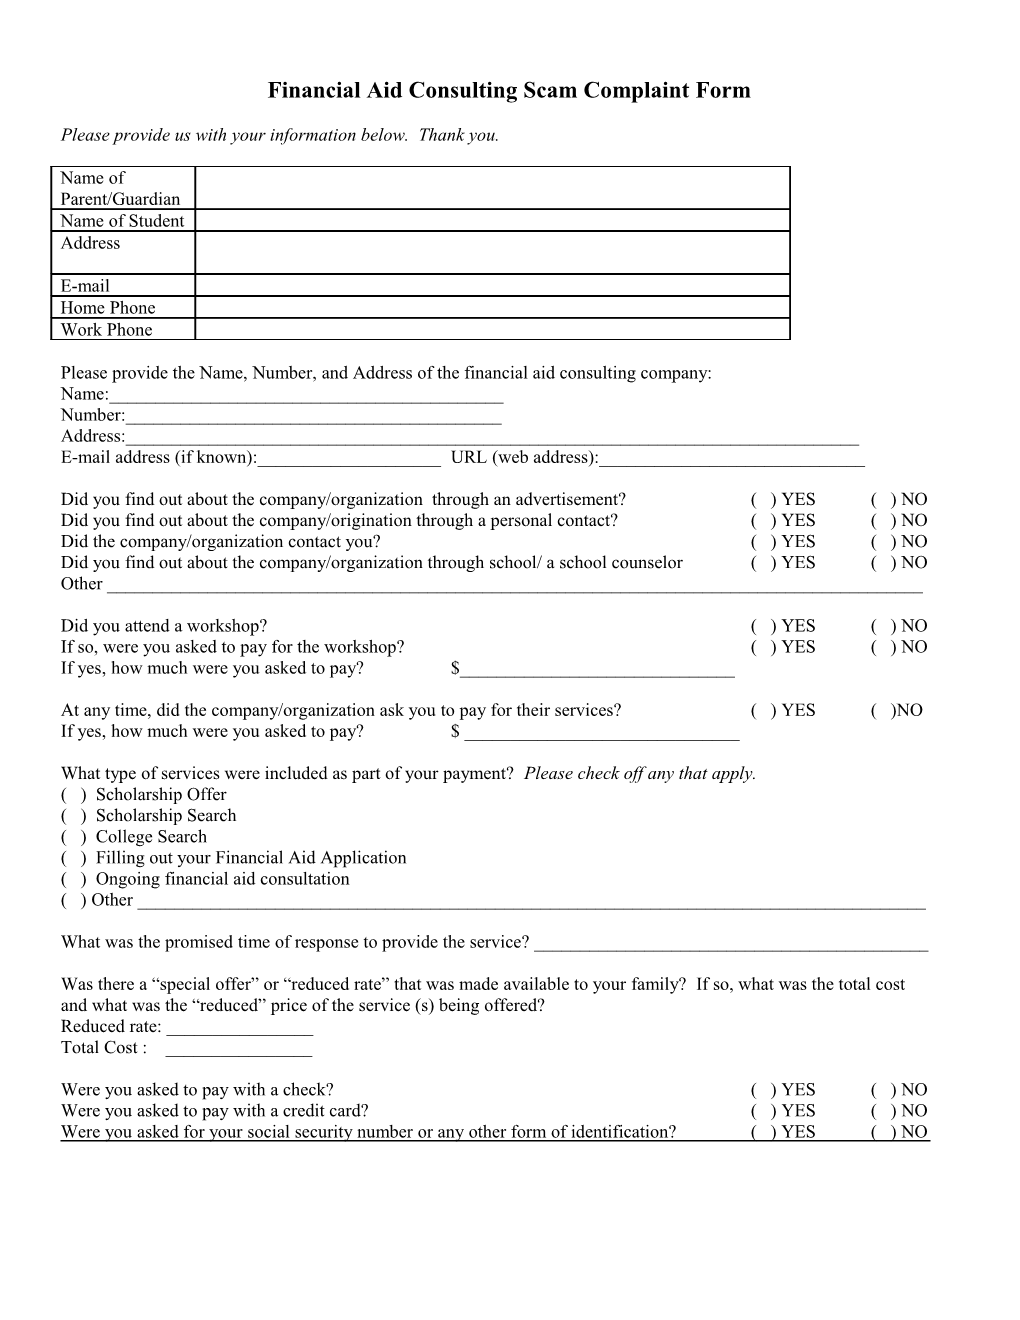 Financial Aid Consulting Scam Complaint Form